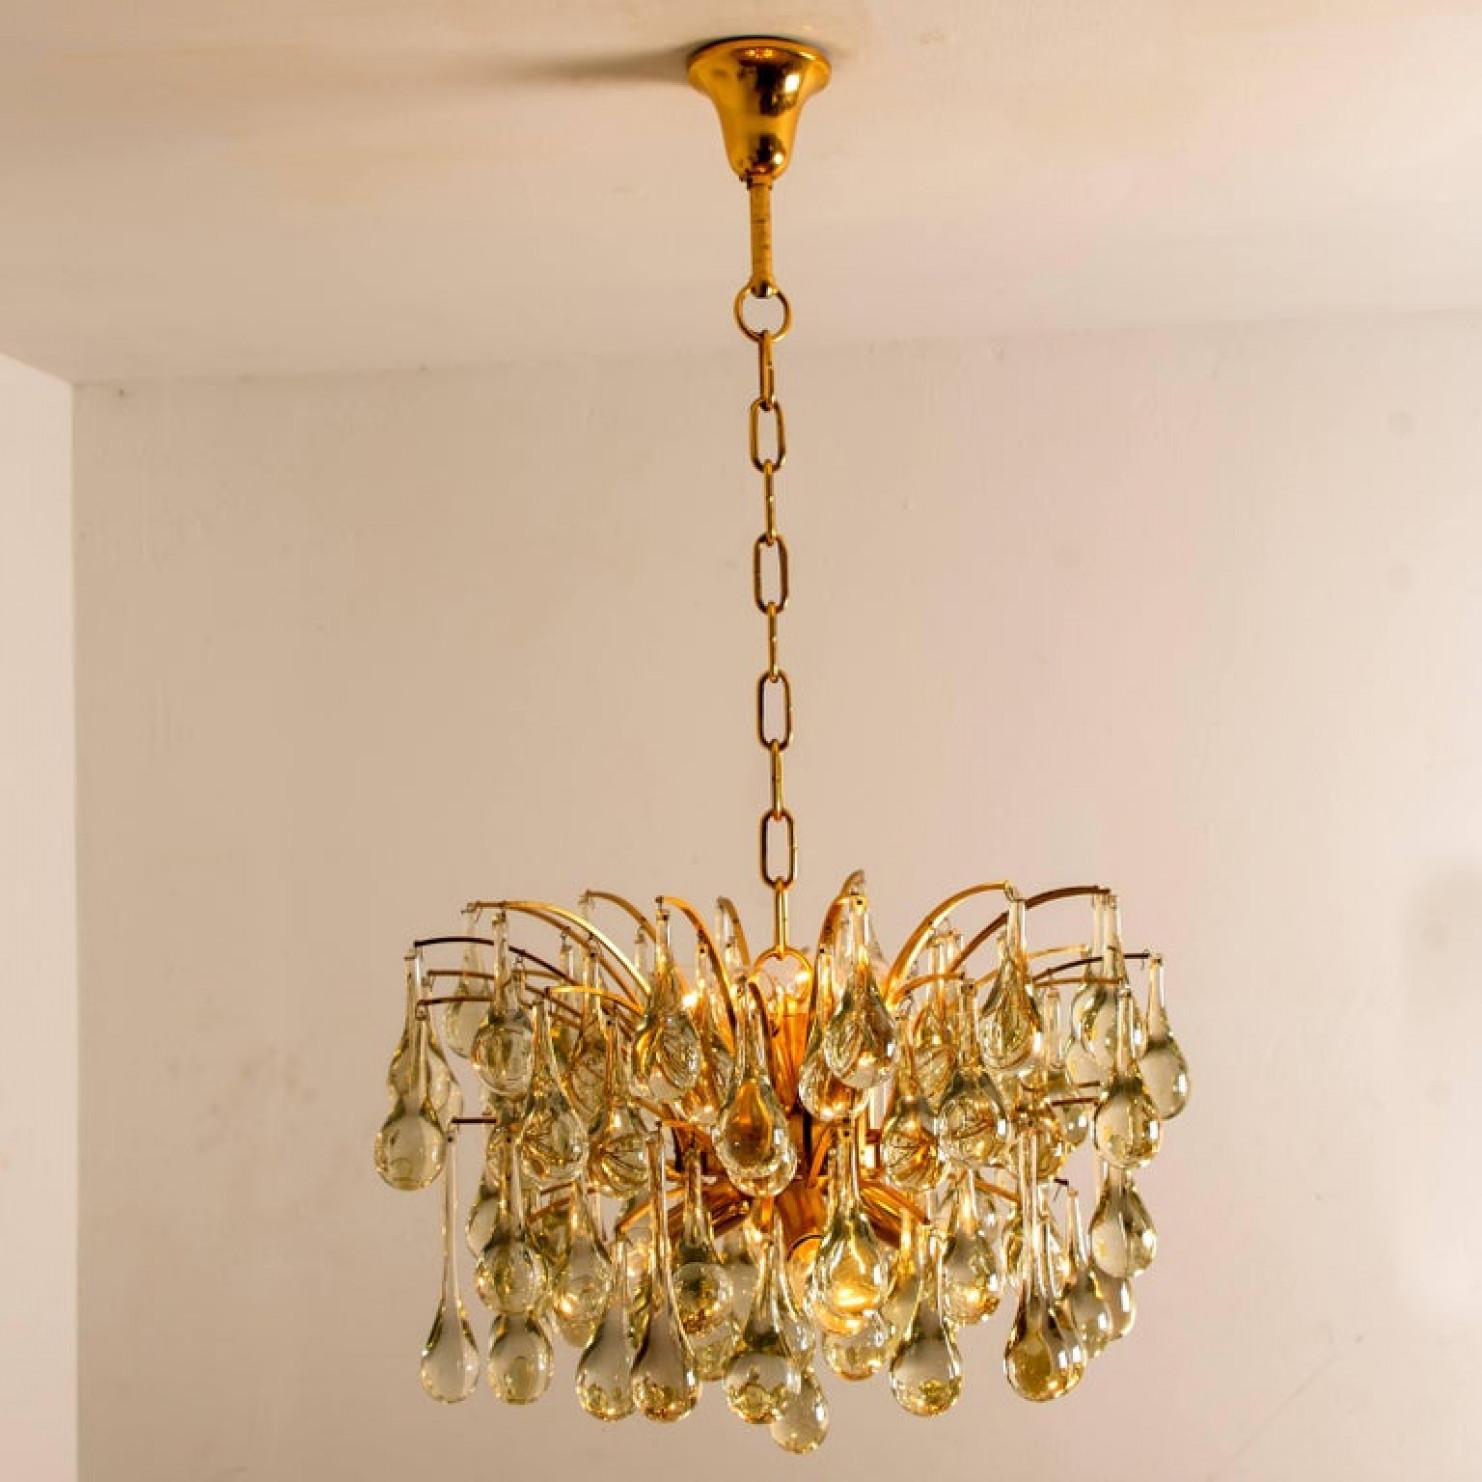 1 of the 2 Large Brass and Crystal Chandeliers, Ernst Palme, Germany, 1970s For Sale 3